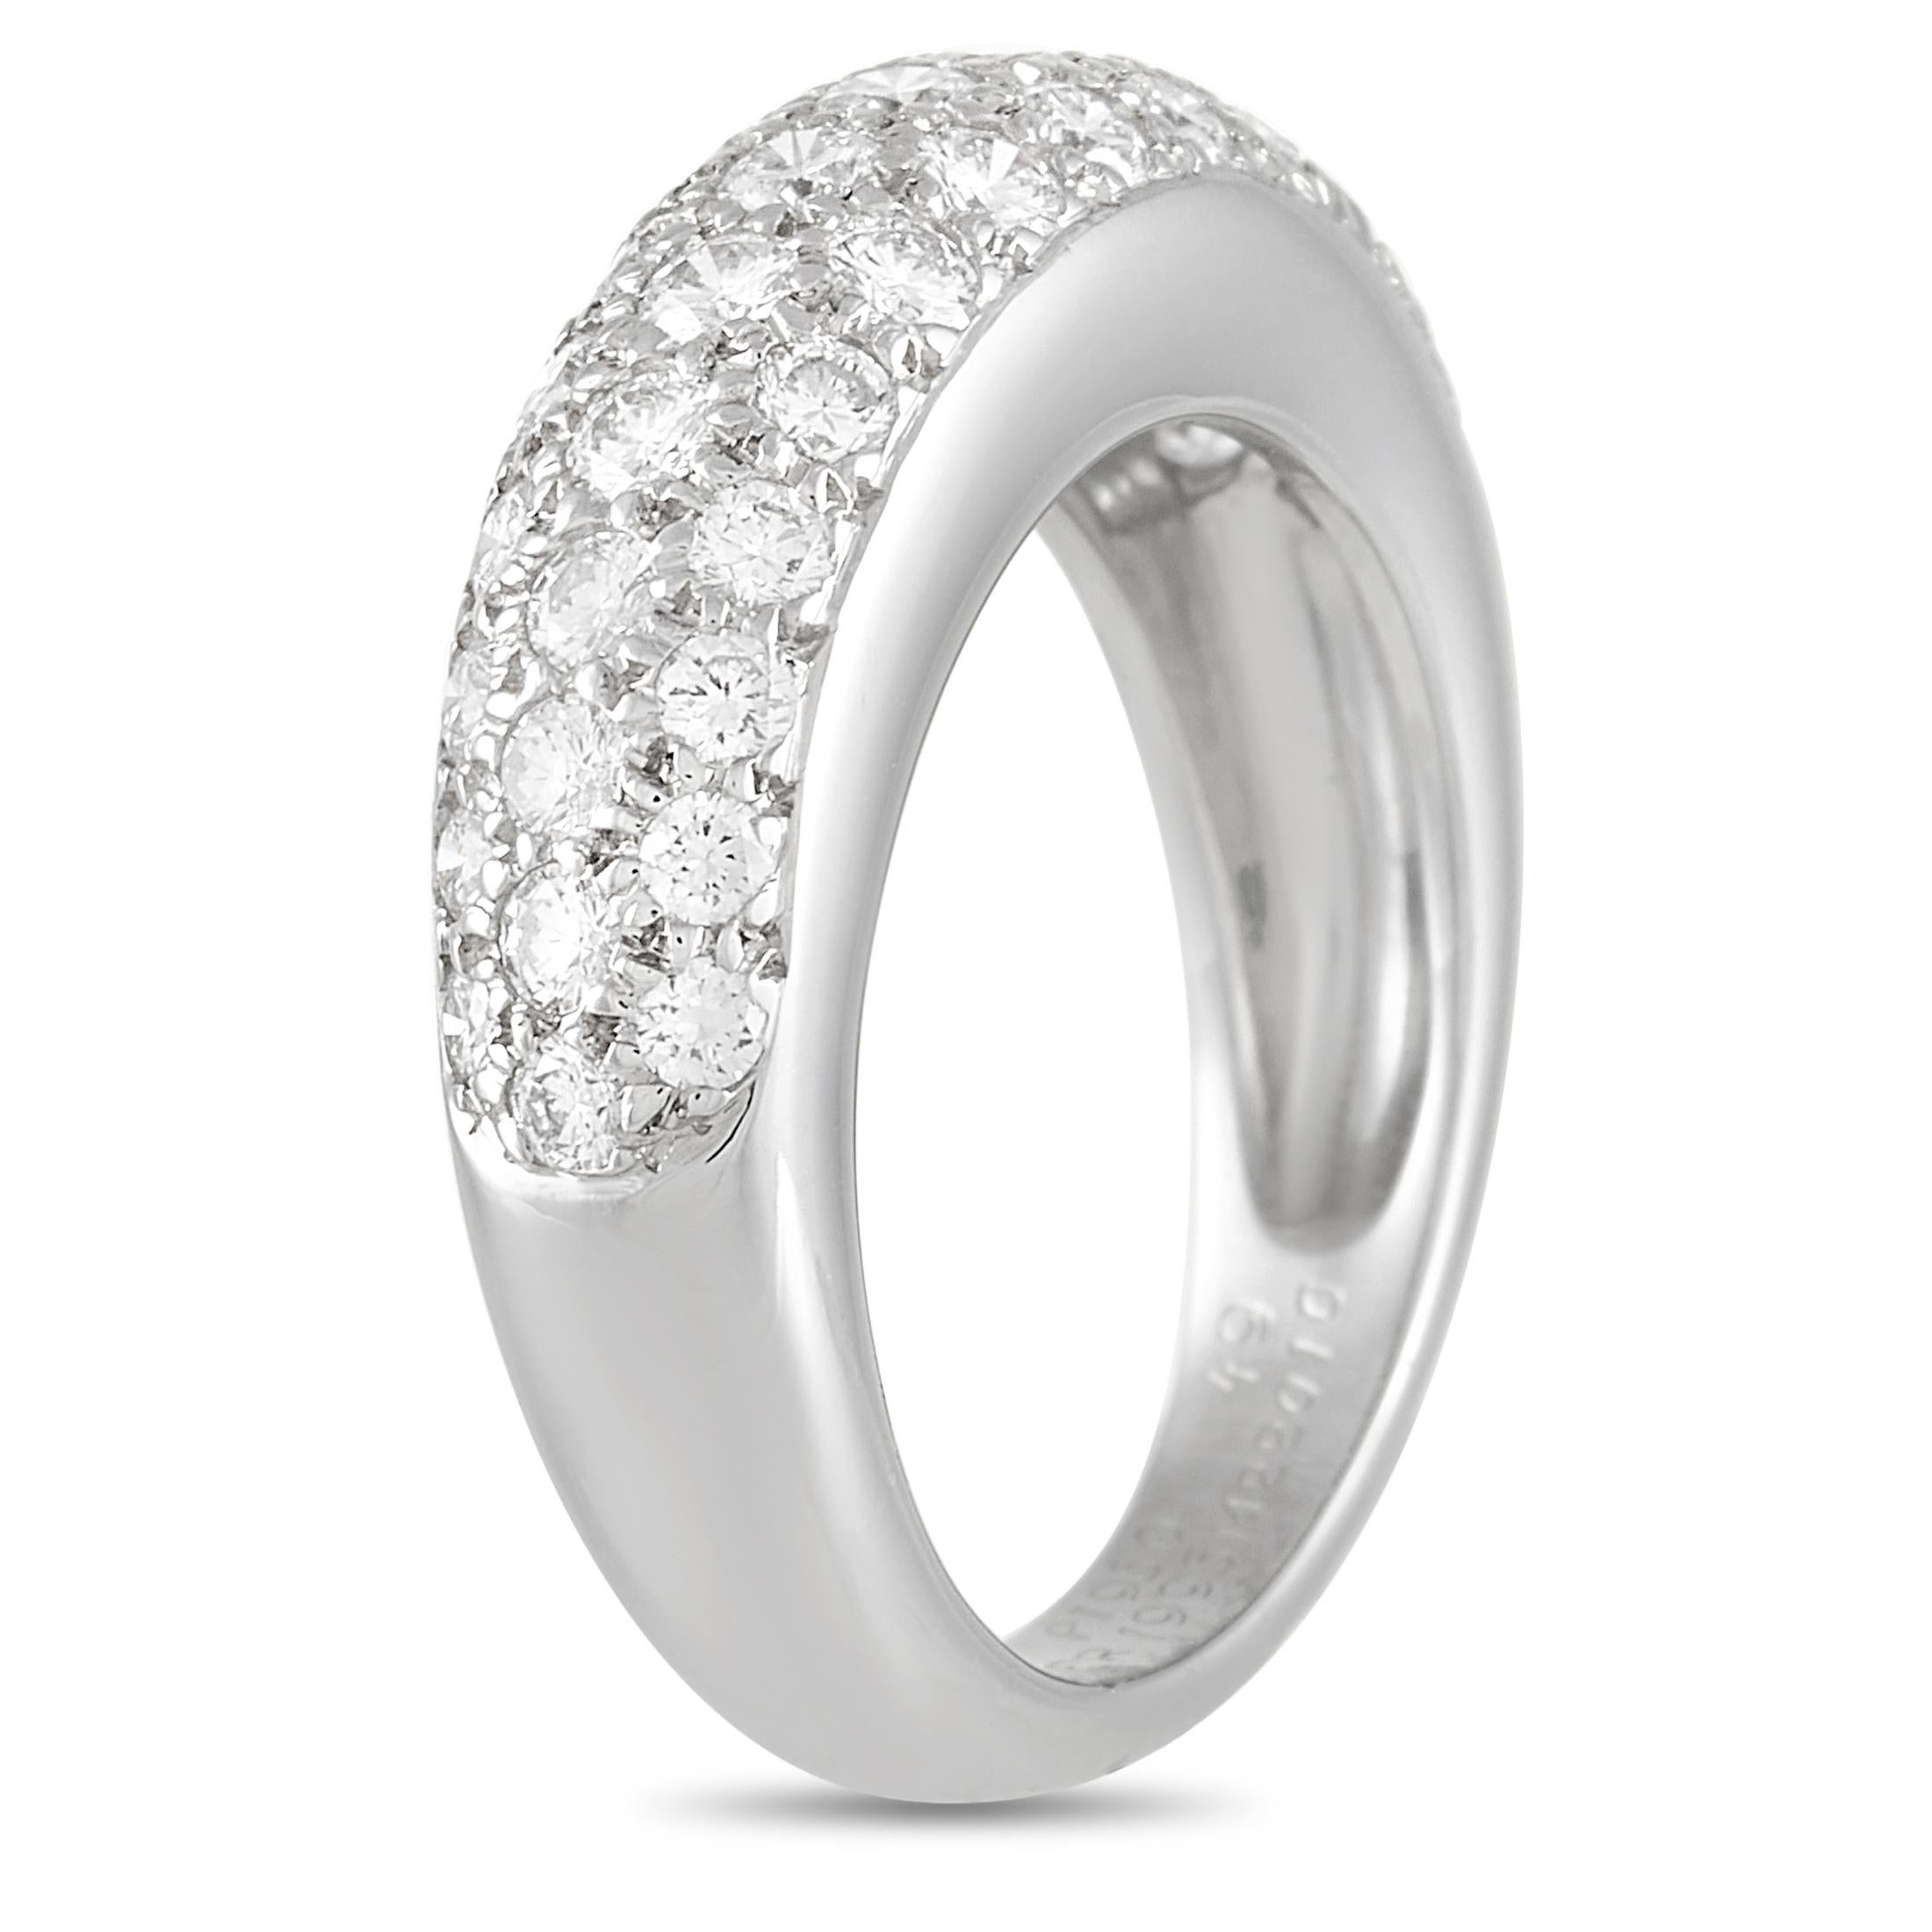 This classy Cartier 18K White Gold Diamond Ring is a statement piece, the ring is made with 18K white gold and set with round diamonds through half of the band. The ring has a band thickness of 4 mm, a top height of 4 mm, and top dimensions of 6 by